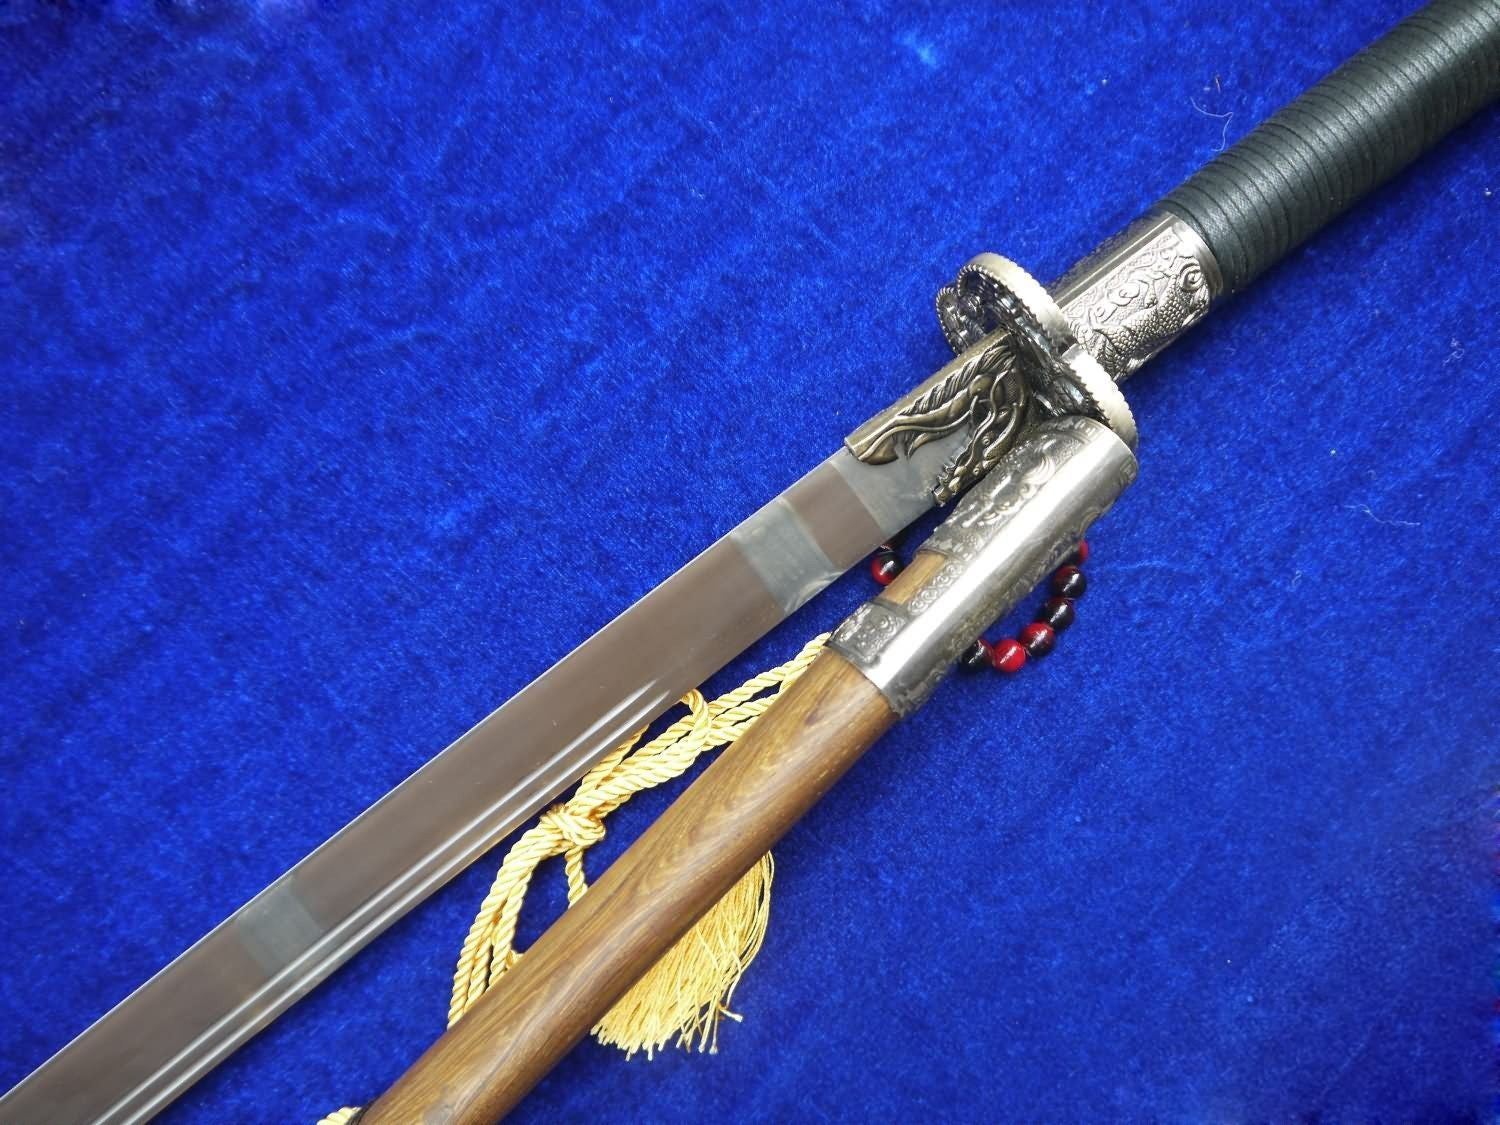 Kangxi sword,Saber,Niger,High carbon steel,Rosewood Scabbard,Alloy fitting - Chinese sword shop